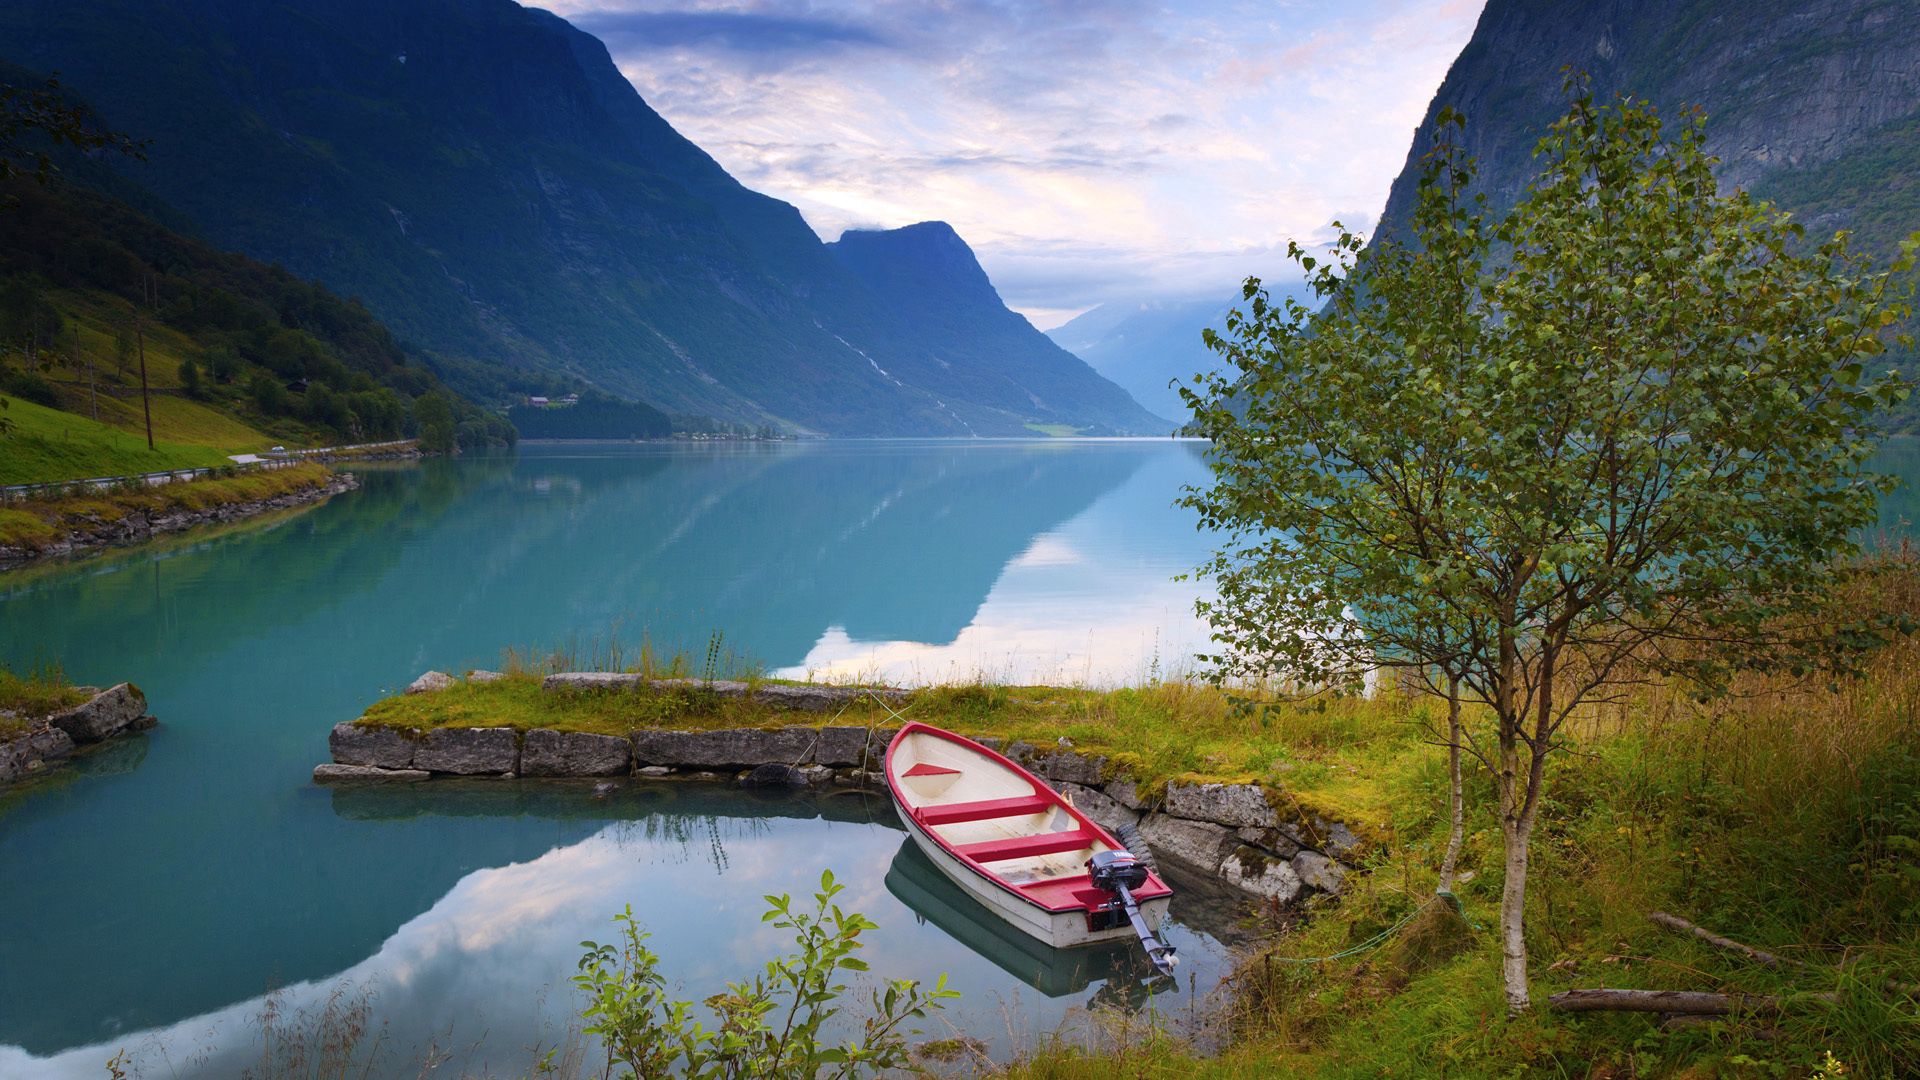 android norway, lake, nature, grass, stones, mountains, shore, bank, boat, blue water